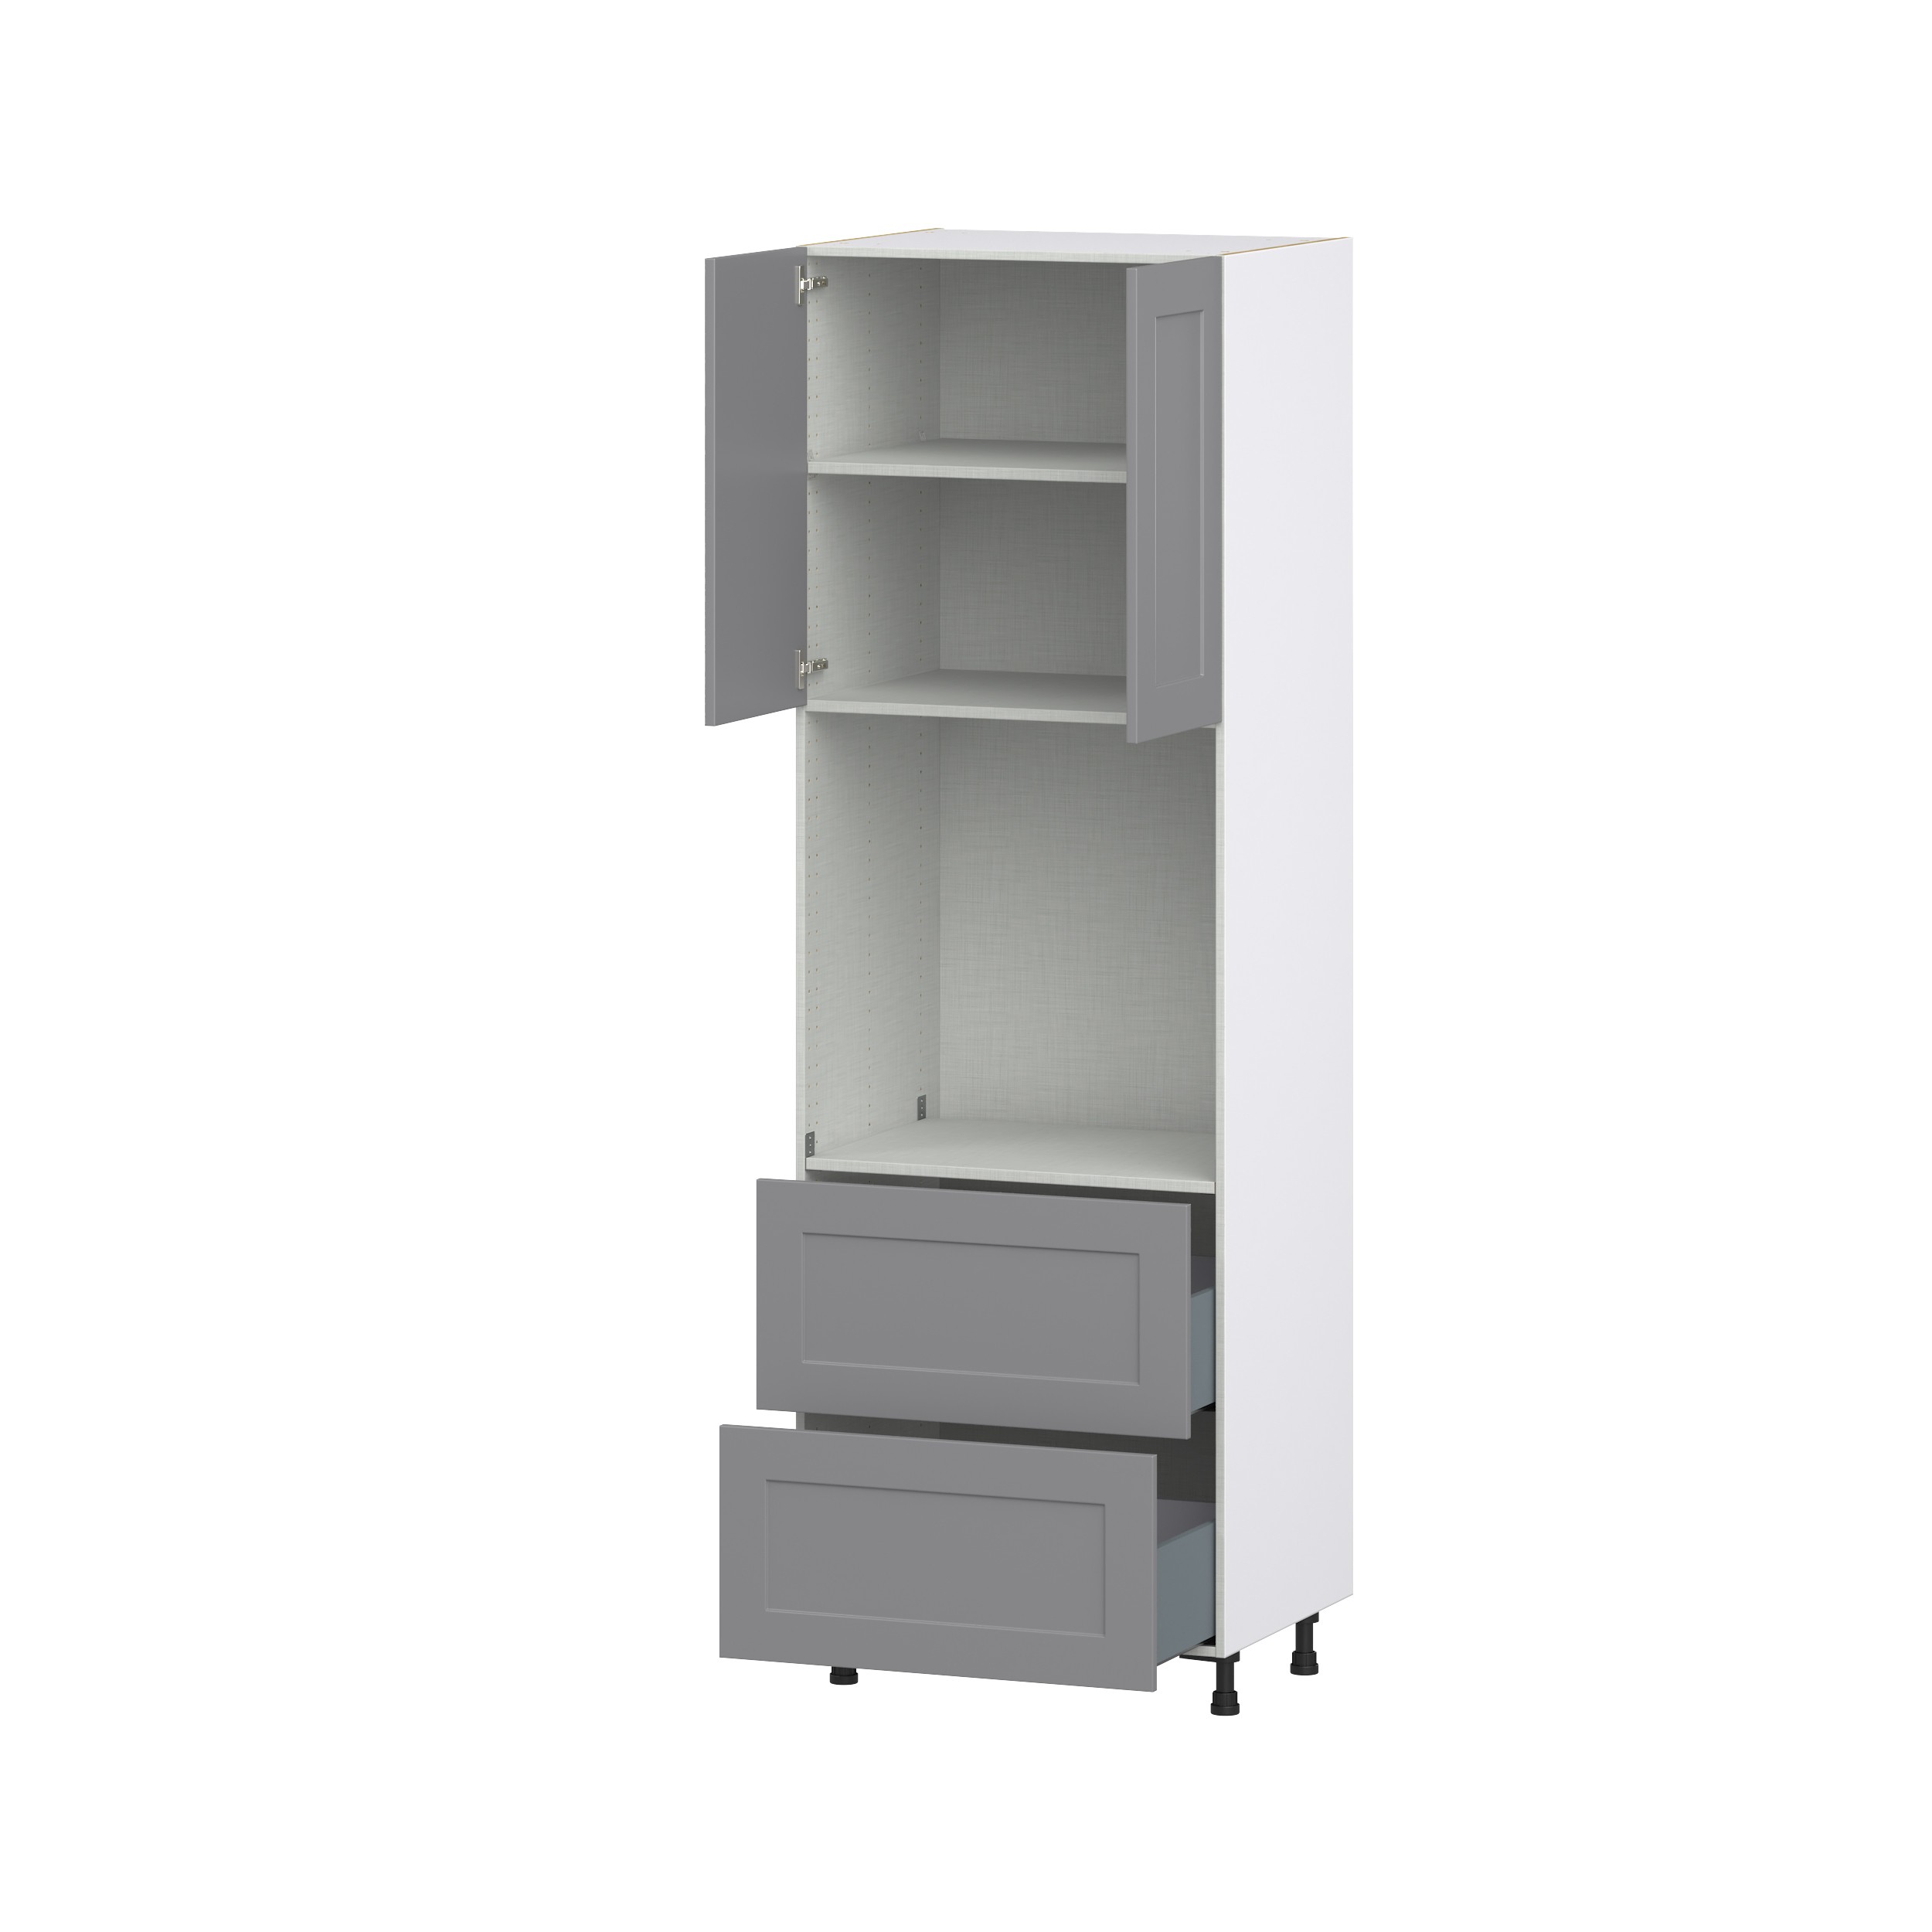 Willow Painted Slate Gray Shaker Assembled Pantry Single Oven Cabinet with 2 Drawer (30 in. W X 94.5 in. H X 24 in. D)